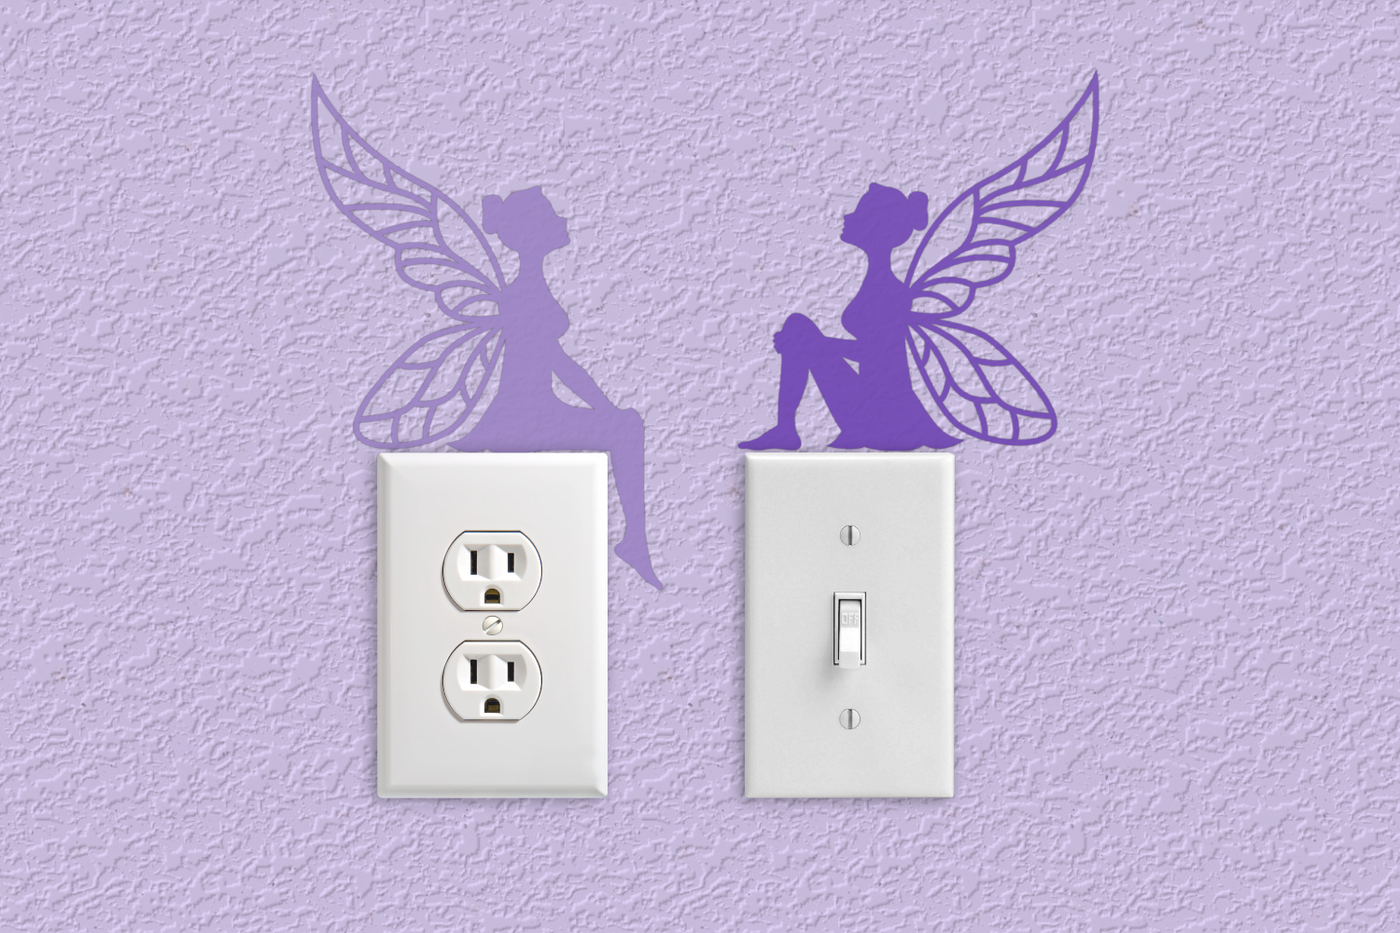 A light switch and outlet on a lavender wall. Sitting on the covers are two fairy silhouettes in purple with detailed wings.